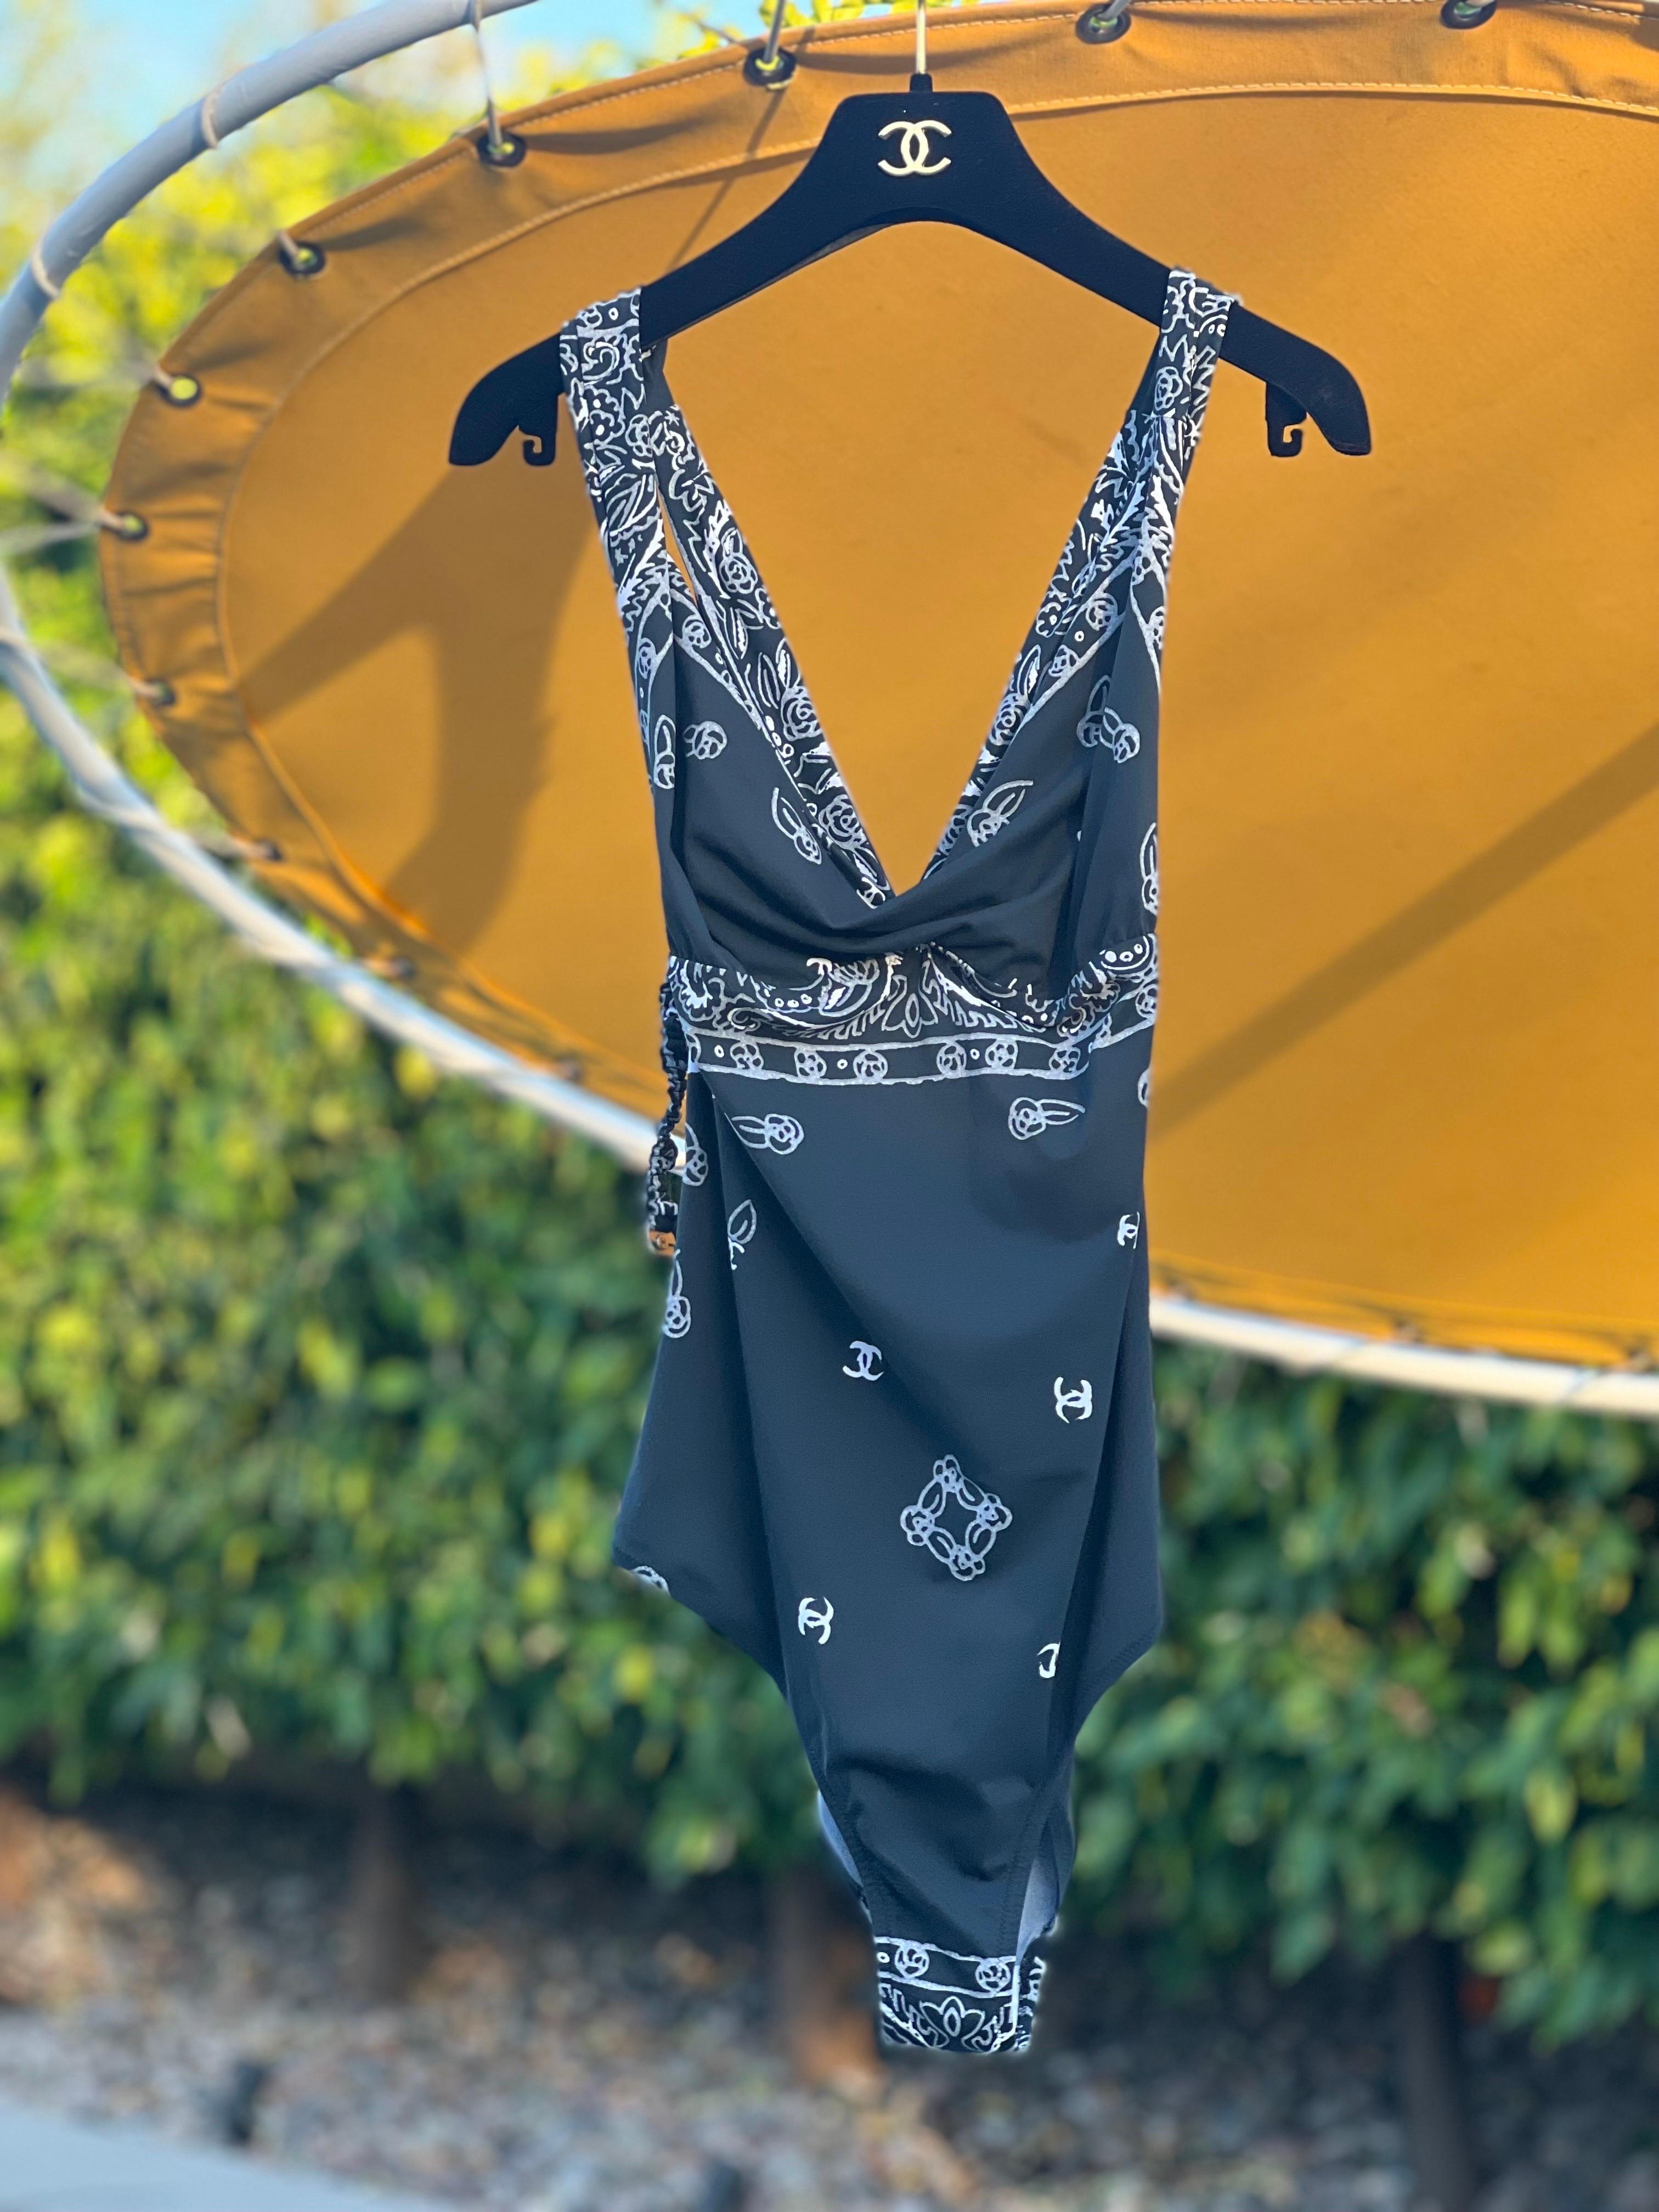 Doesn't it feel good to be the most fashionable one in the room? With the purchase of this chic and fun Chanel swimsuit, you'll be the most fashionable at any pool party! Name something better than Chanel SWIM! Chanel does such a smart job with this